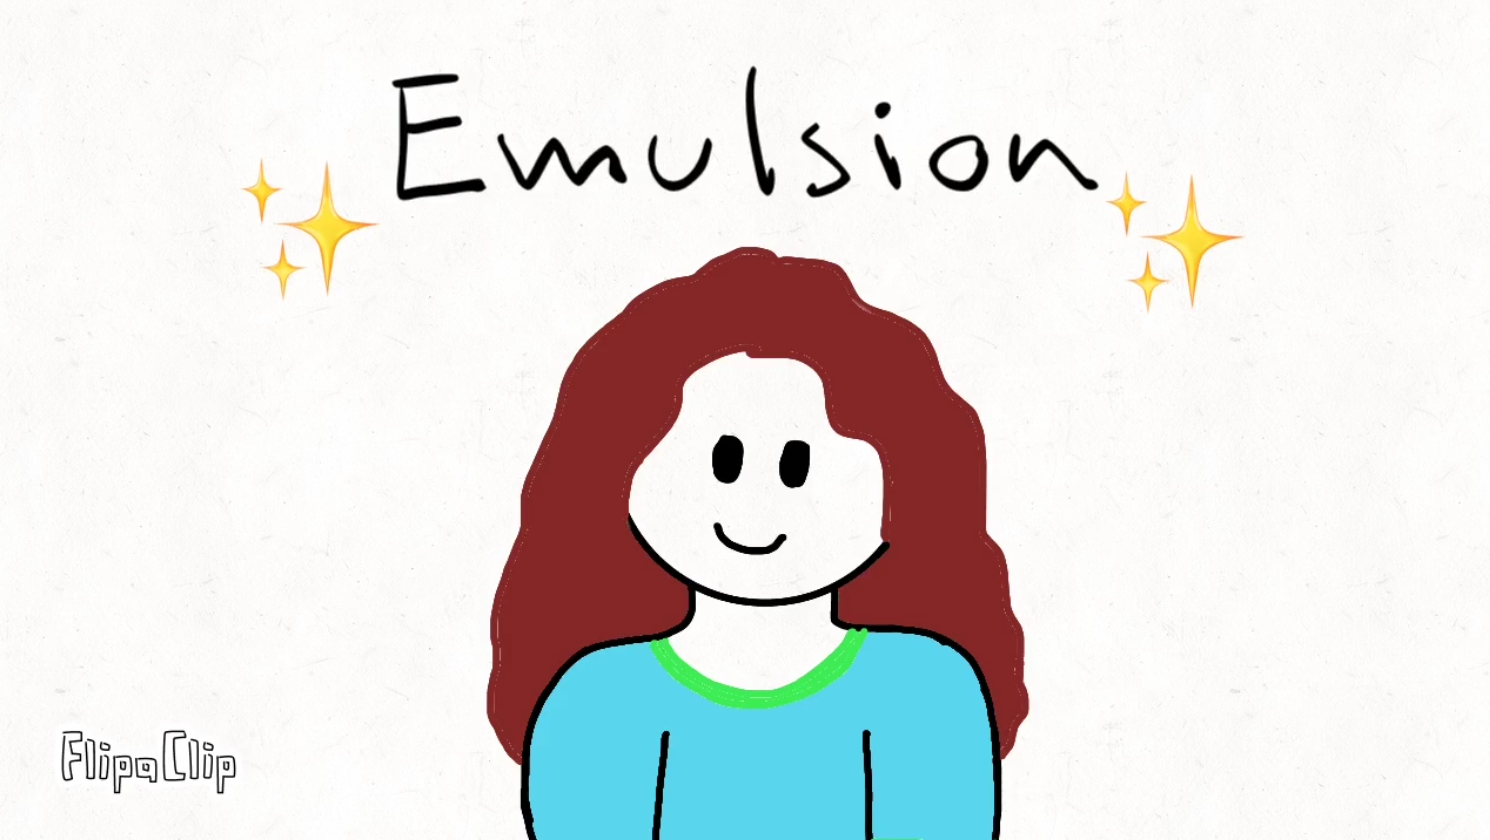 This video explains how emulsion works, and demonstrates the impossible possibility of mixing water and oil together.